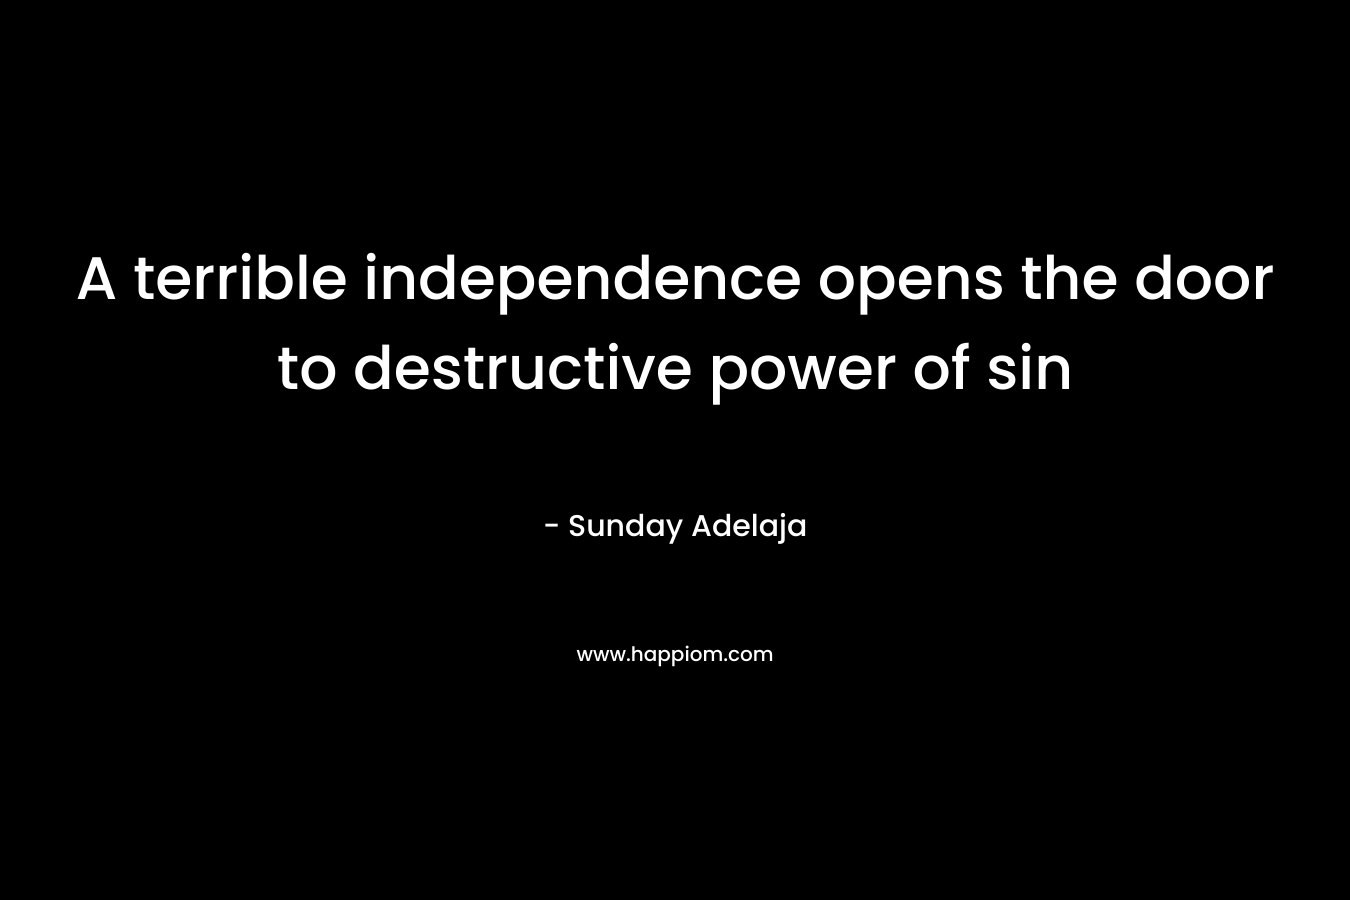 A terrible independence opens the door to destructive power of sin